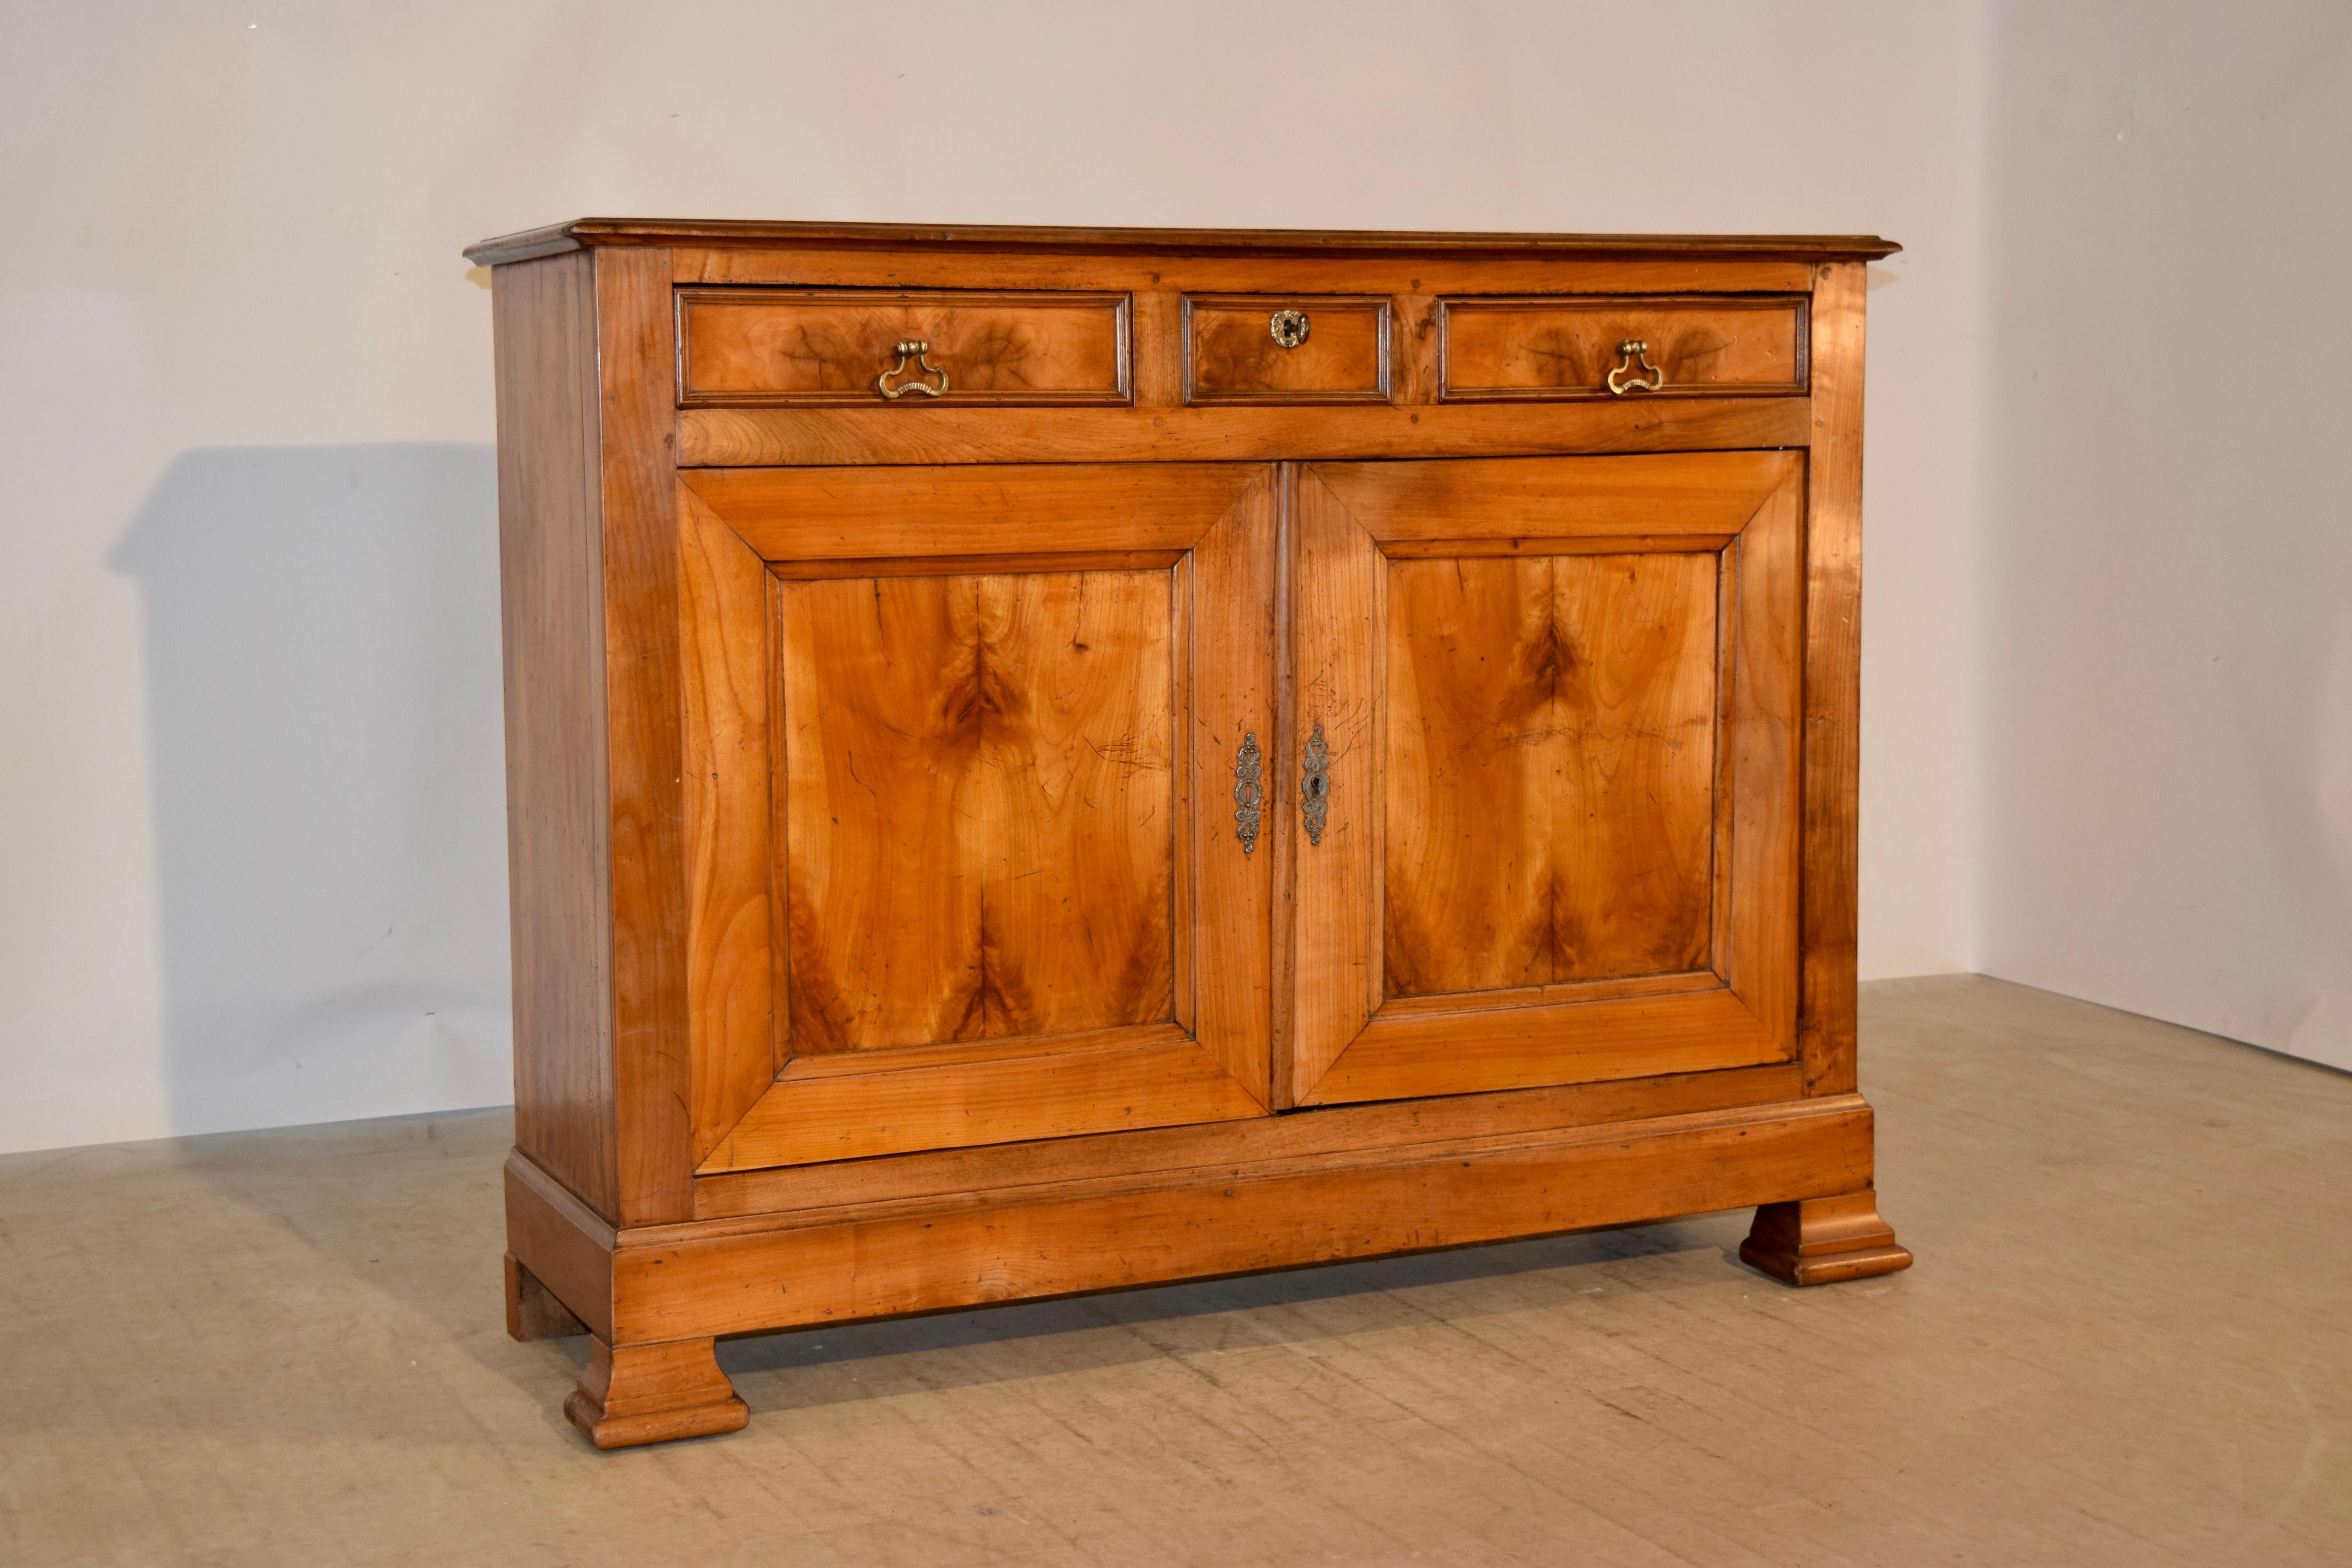 19th century, French buffet made from cherry with a banded top and a beveled edge over a small central drawer flanked by two drawers over two doors, which open to reveal storage. The sides are simple and have lovely graining. The piece is raised on